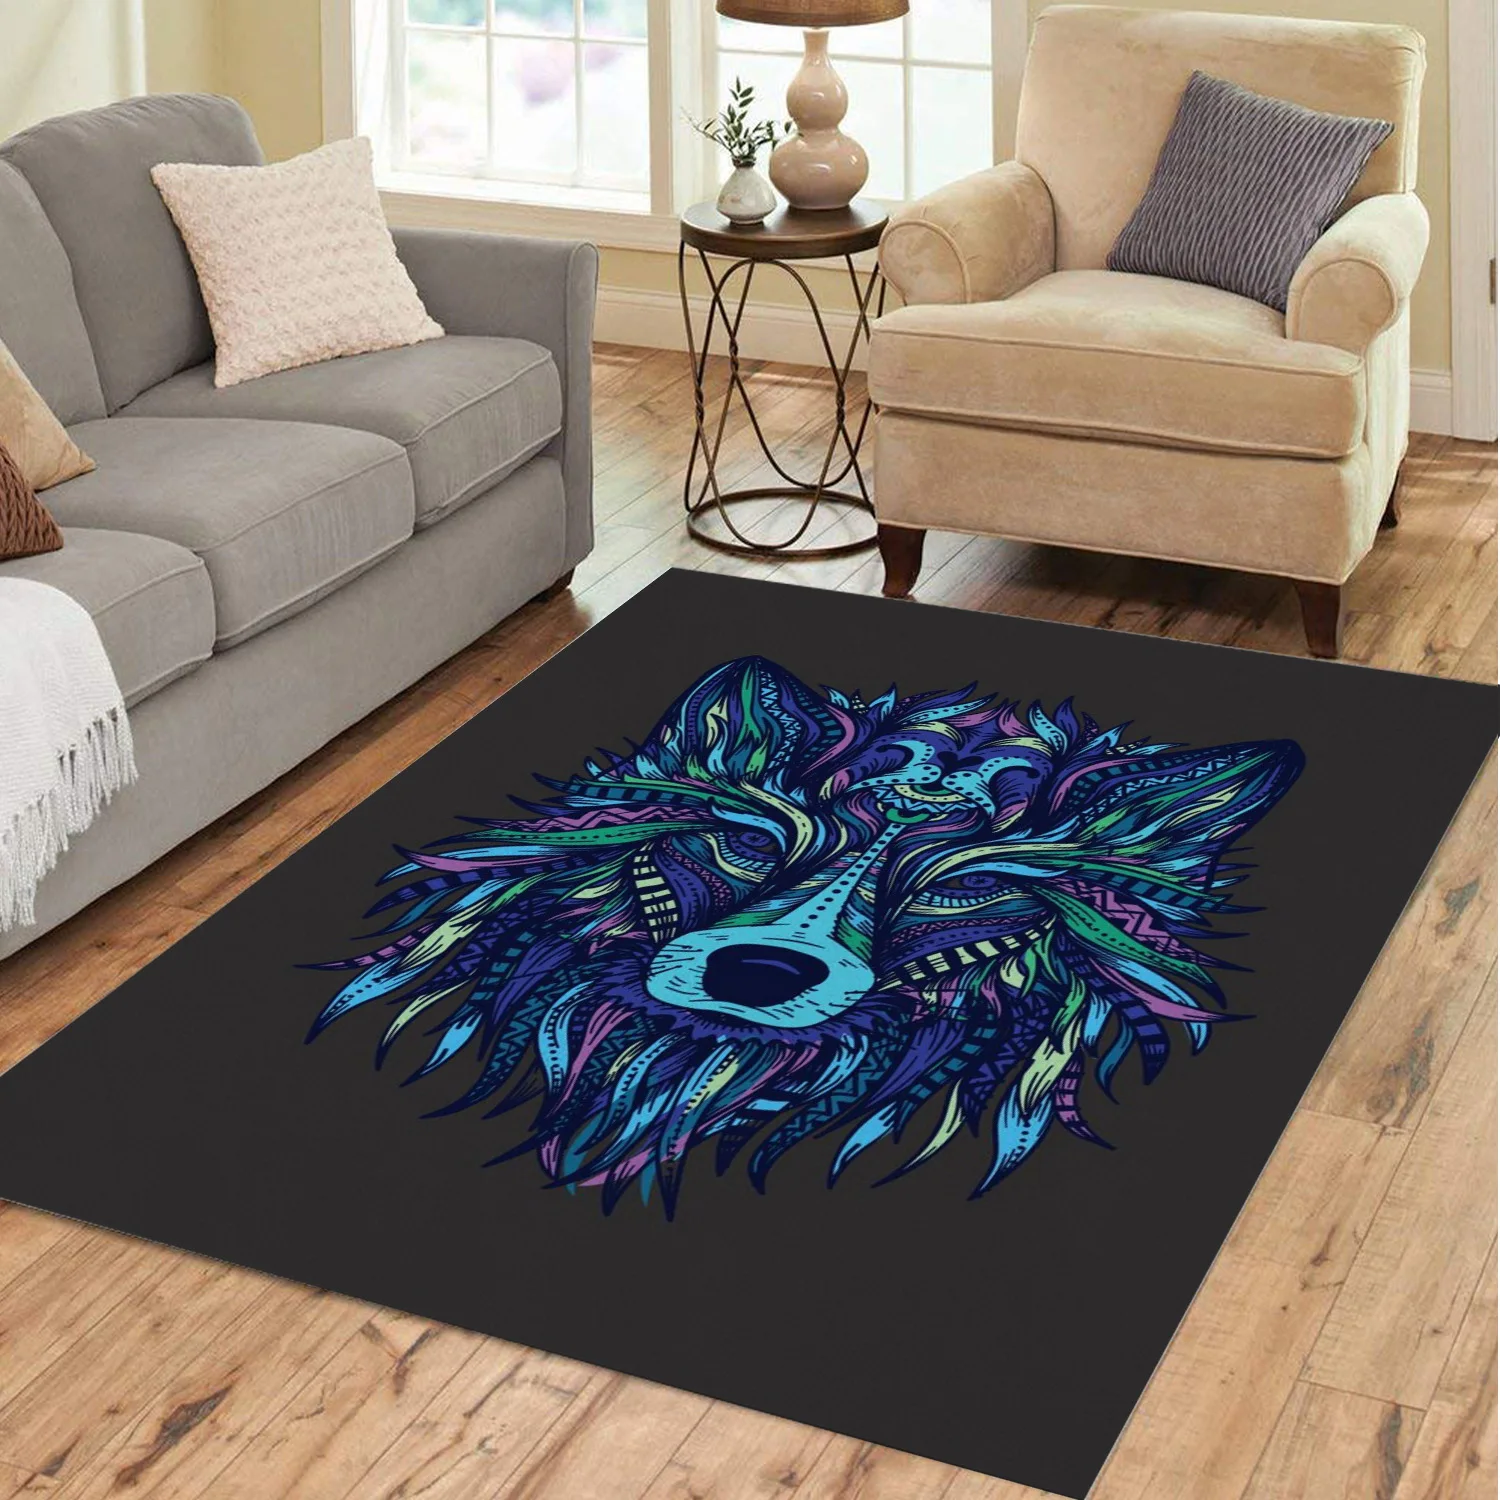 Blue Mandala Wolf Carpet Living Room Bedroom Carpet for Lounge Computer Chair Coffee Table Area Rugs Summer New Floor Mats